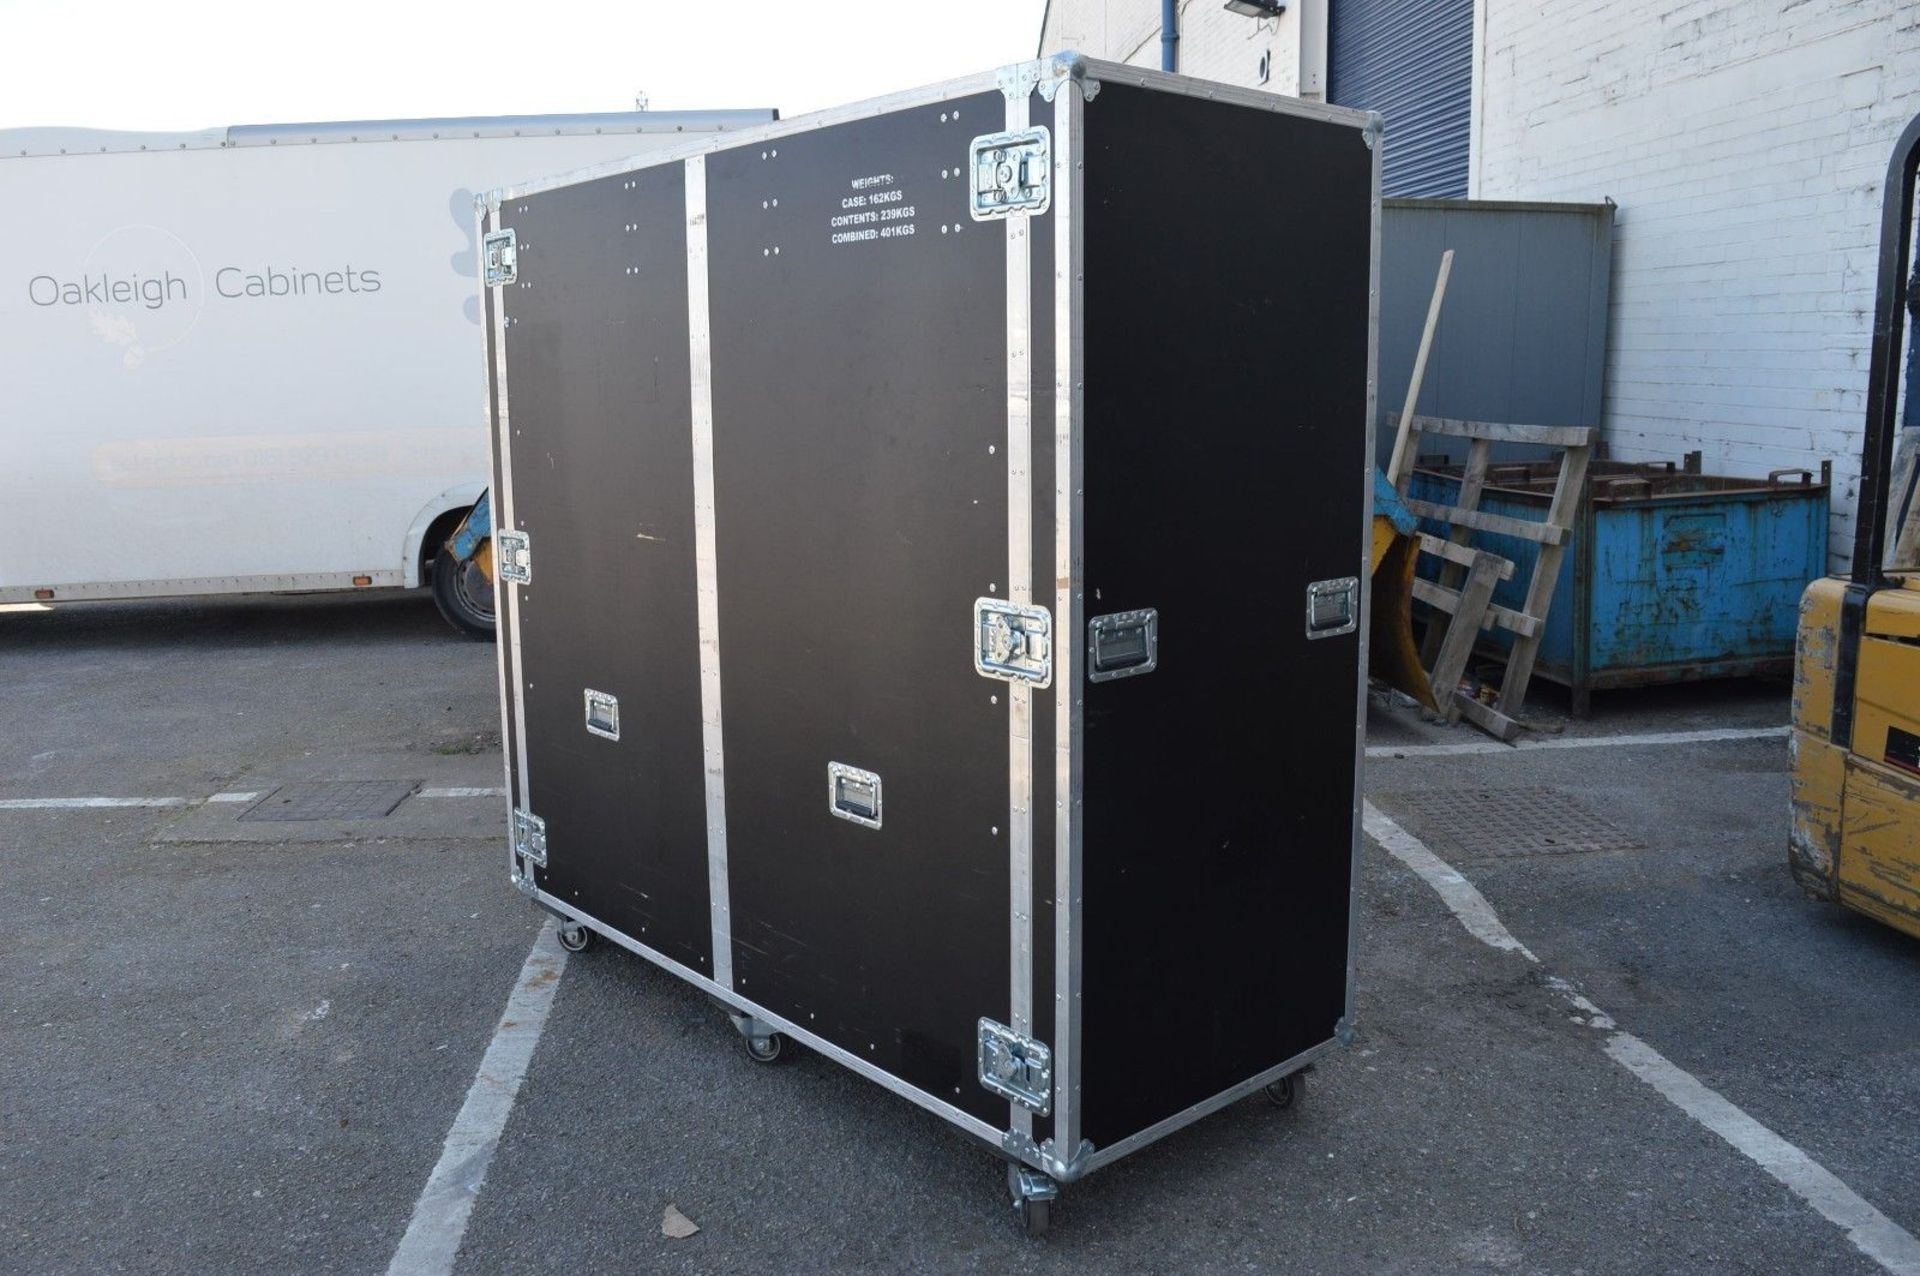 1 x Large Flight Case With Castors and Ramp For Easy Loading - H188 x W200 x D79 cms - CL011 - - Image 10 of 11